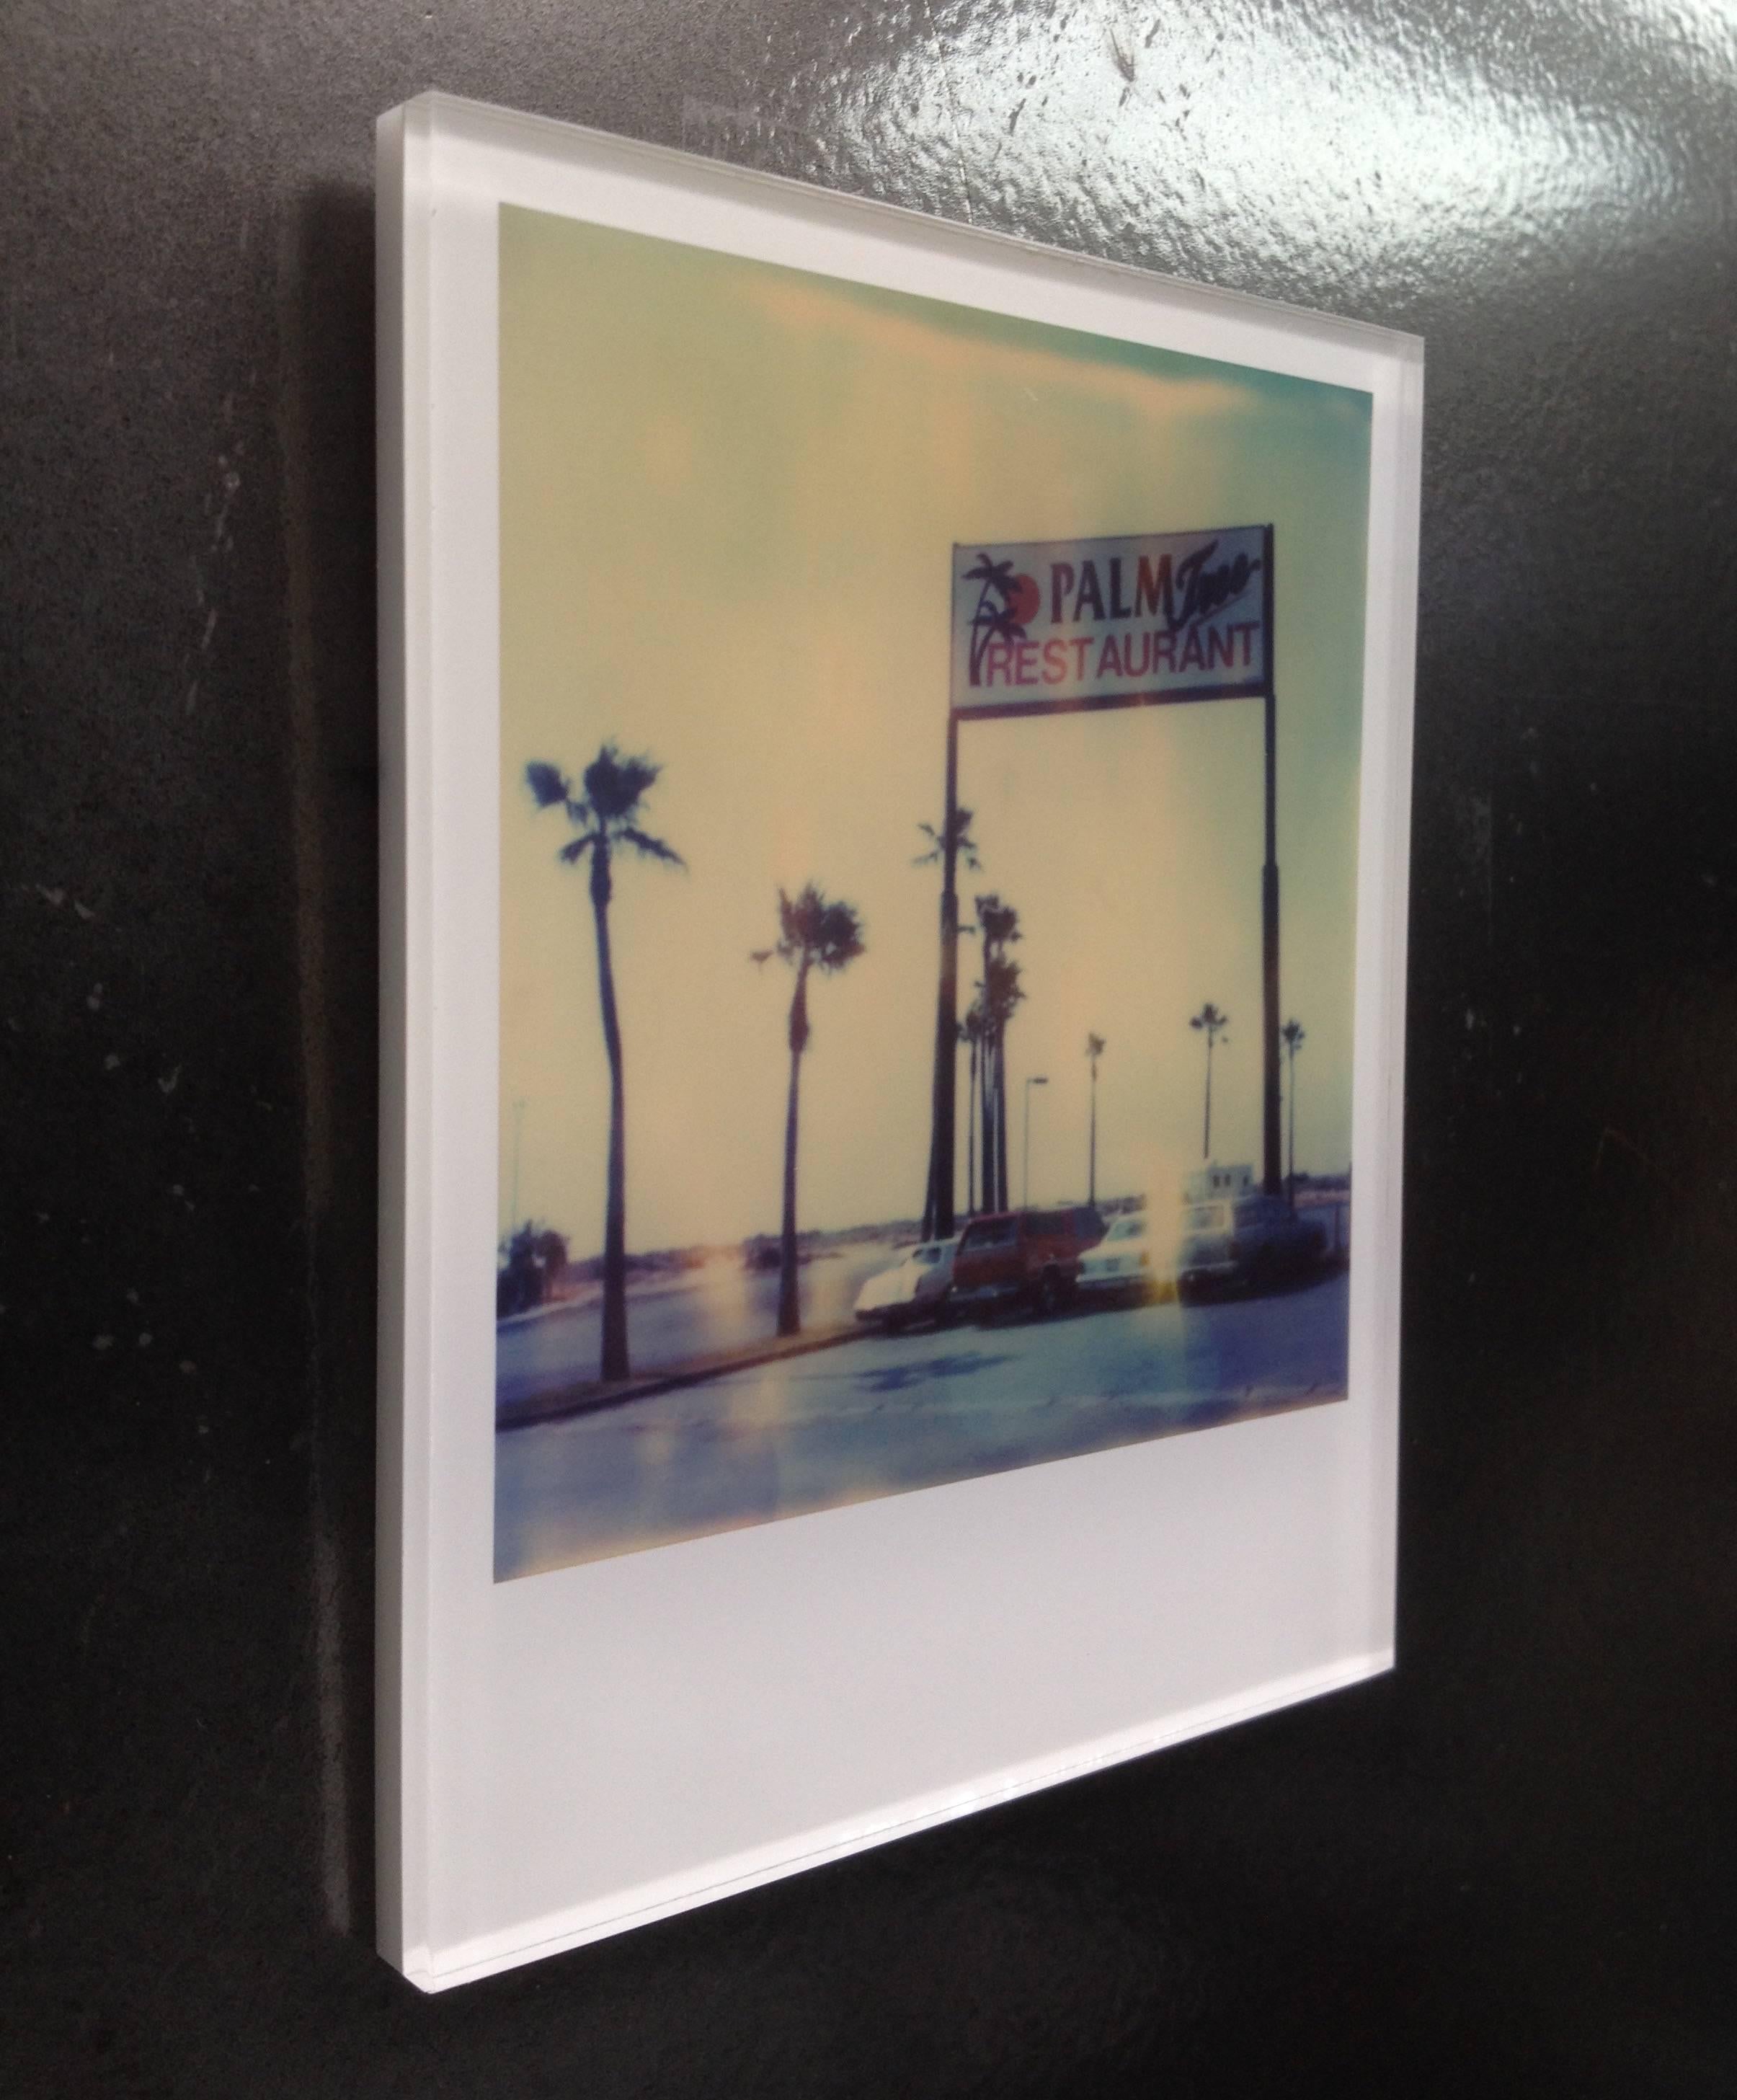 Stefanie Schneider's Minis
Palm Tree Restaurant, 1999

signed and signature brand on verso
Lambda digital Color Photographs based on a Polaroid

Polaroid sized open Editions 1999-2013
10.7 x 8.8cm (Image 7.9x7.7cm)
mounted: sandwiched in between